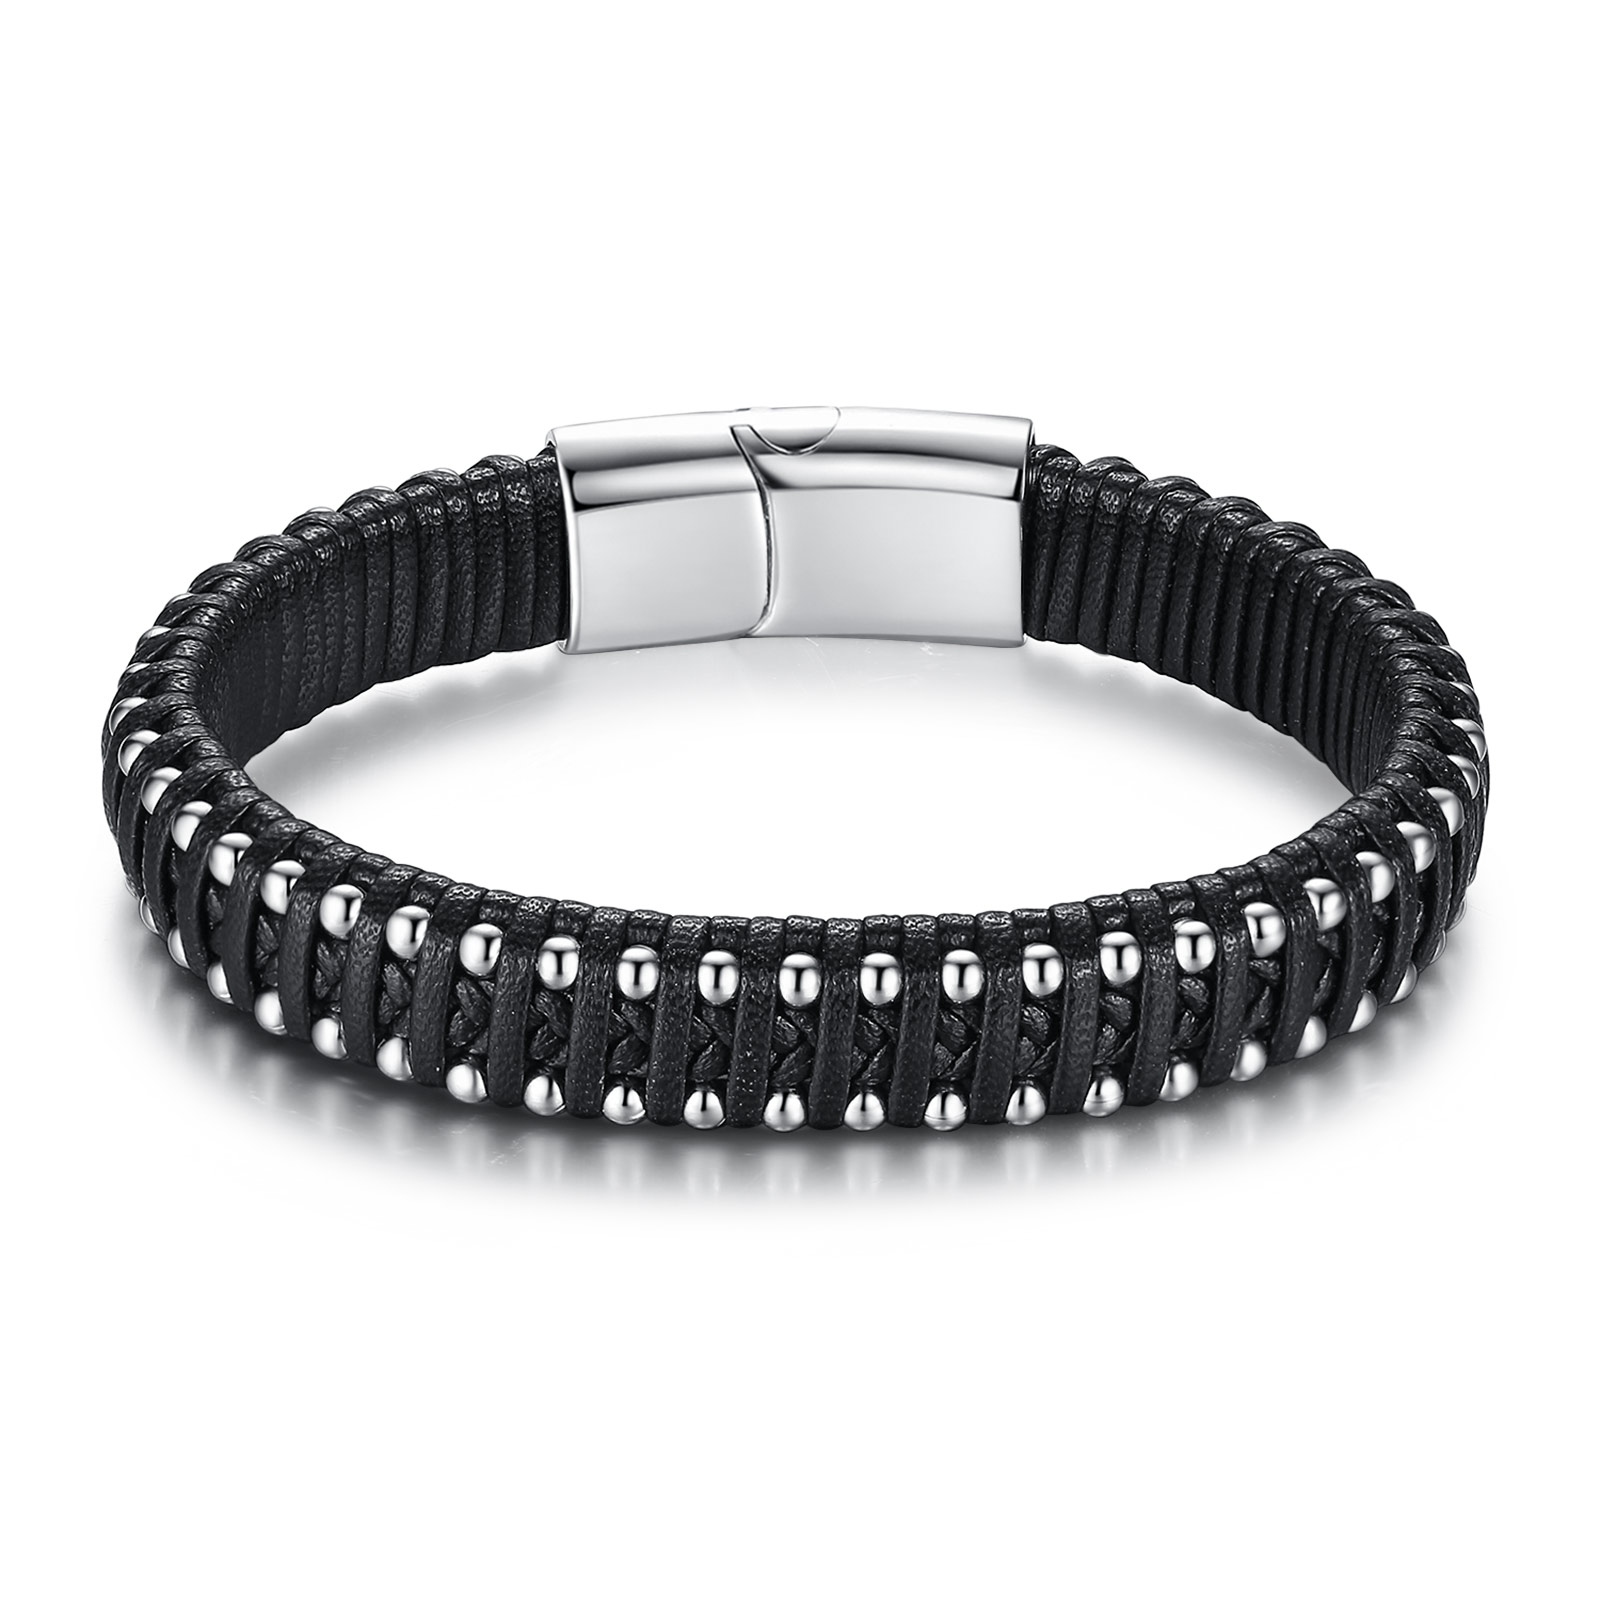 Merryshine Jewelry Fashion Handmade Braided Leather Stainless Steel Magnetic Bracelets for Men